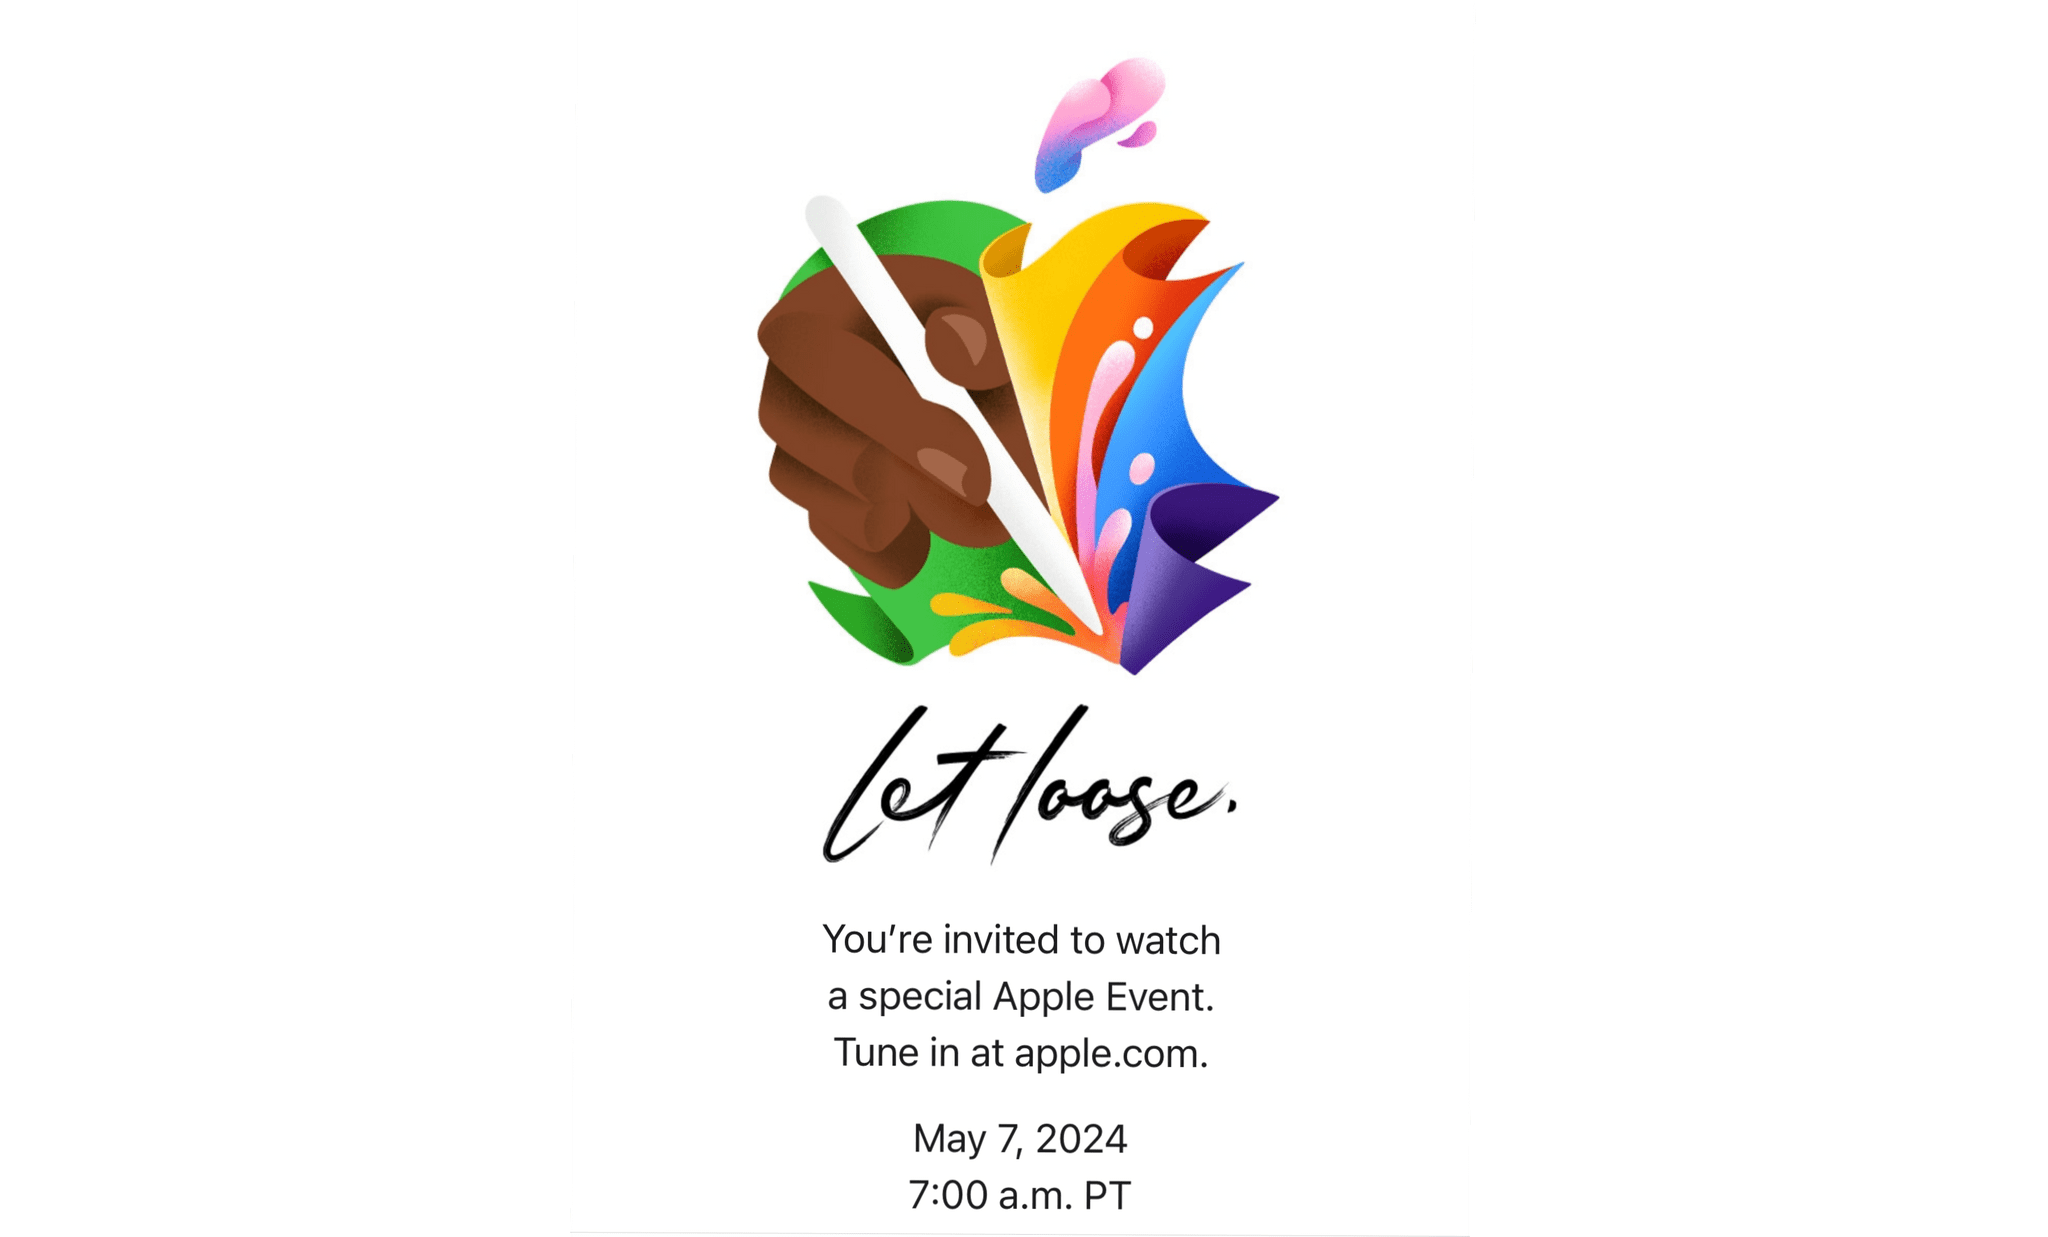 photo of Apple Announces May 7th Let Loose Event image